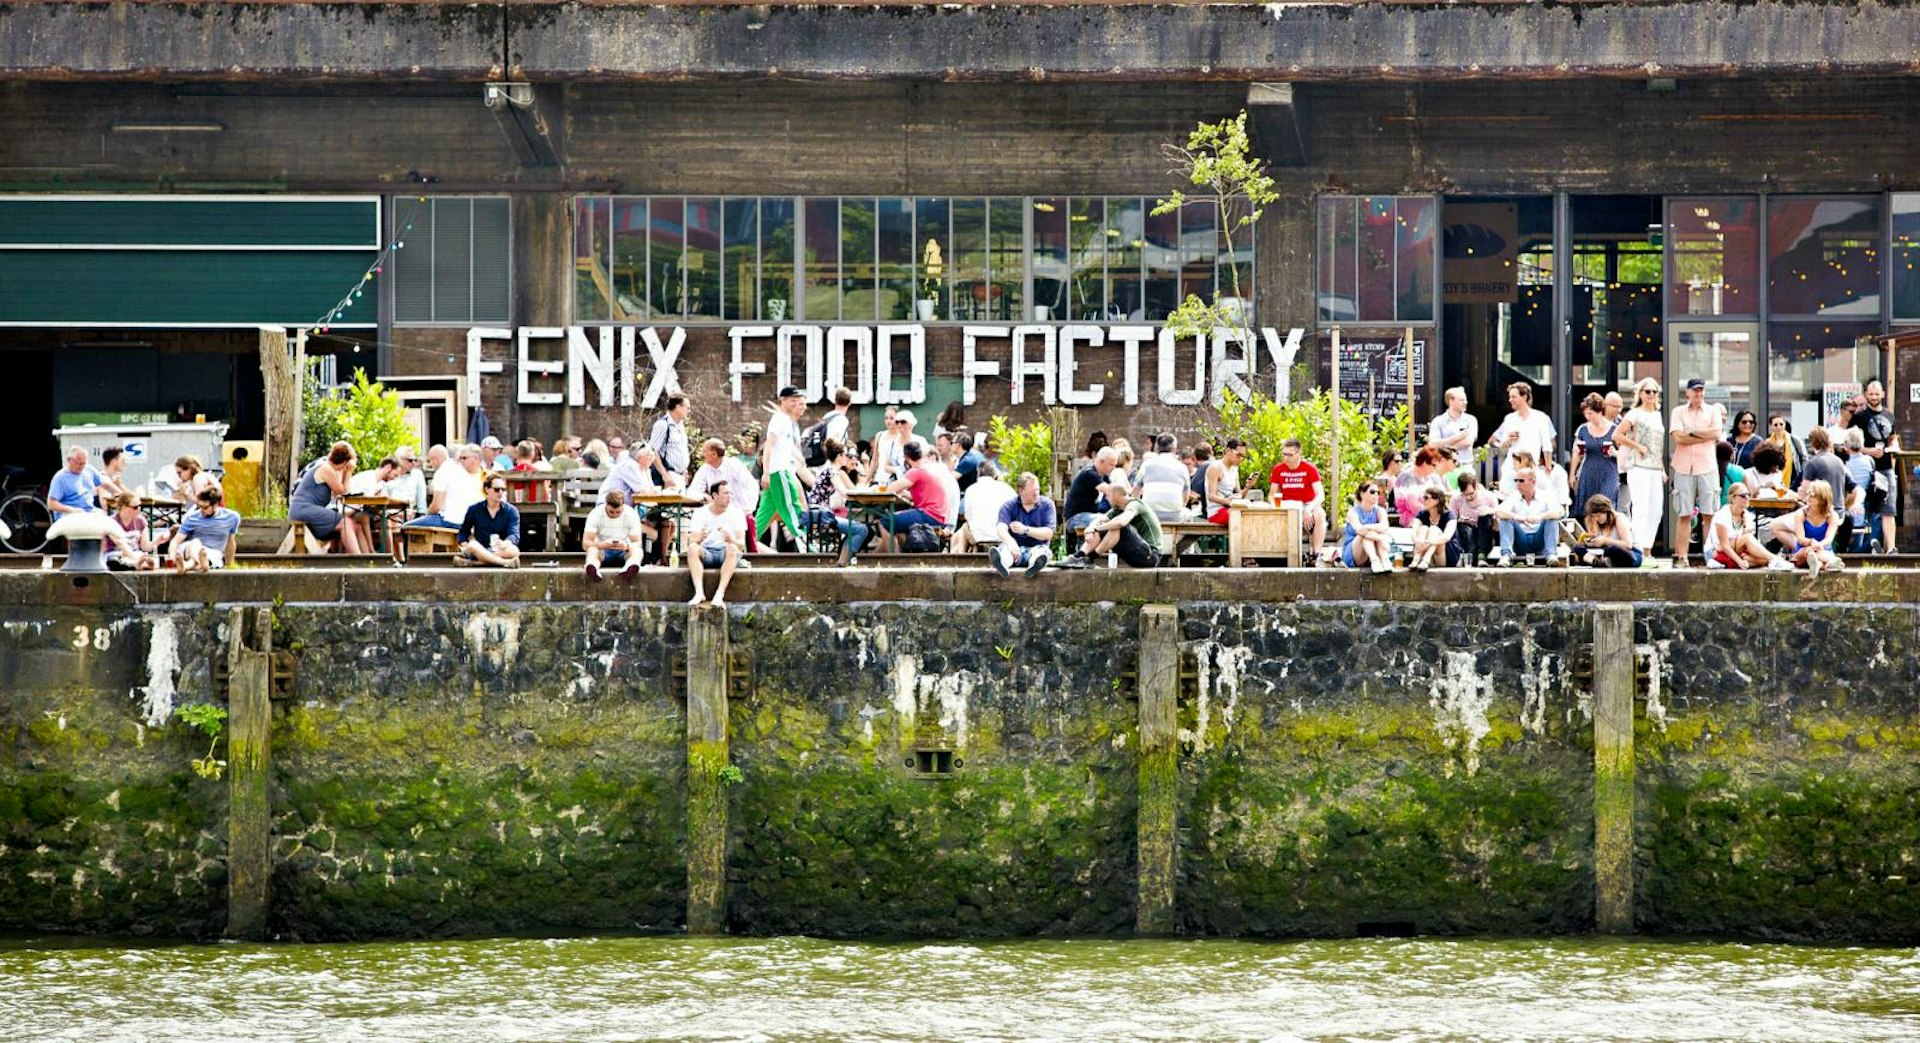 People enjoying the sun at the Fenix Food Factory in Katendrecht, Rotterdam